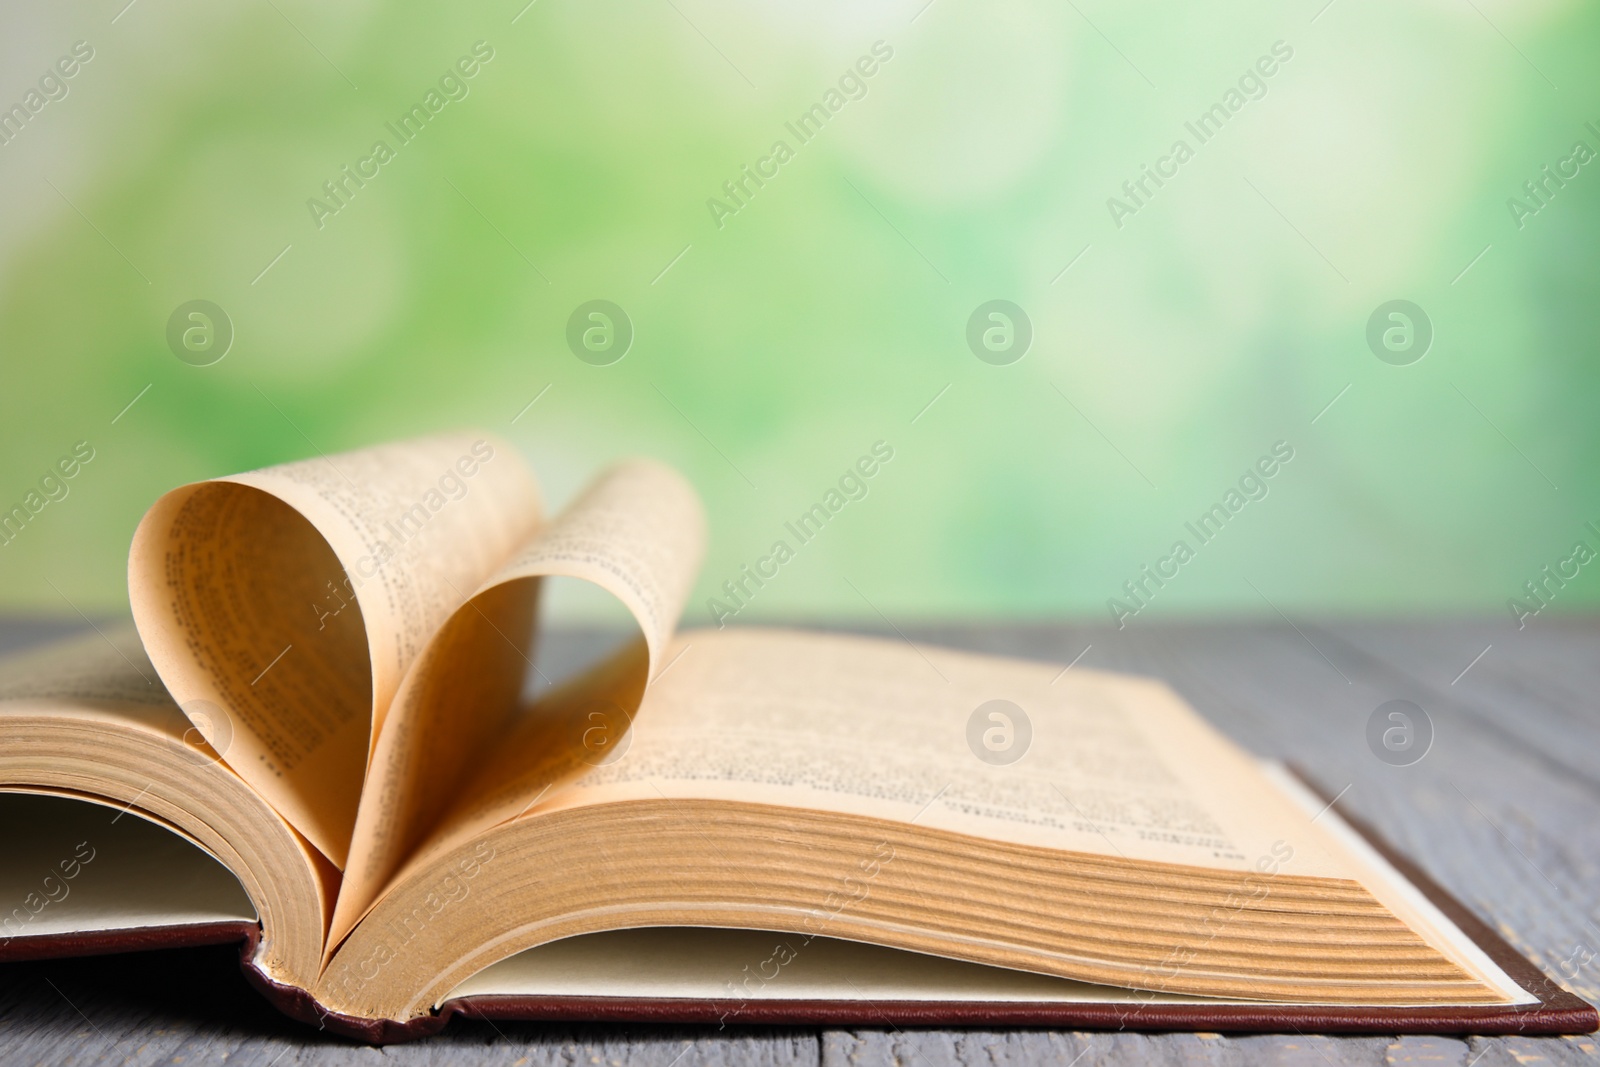 Photo of Open book on grey wooden table against blurred green background, closeup